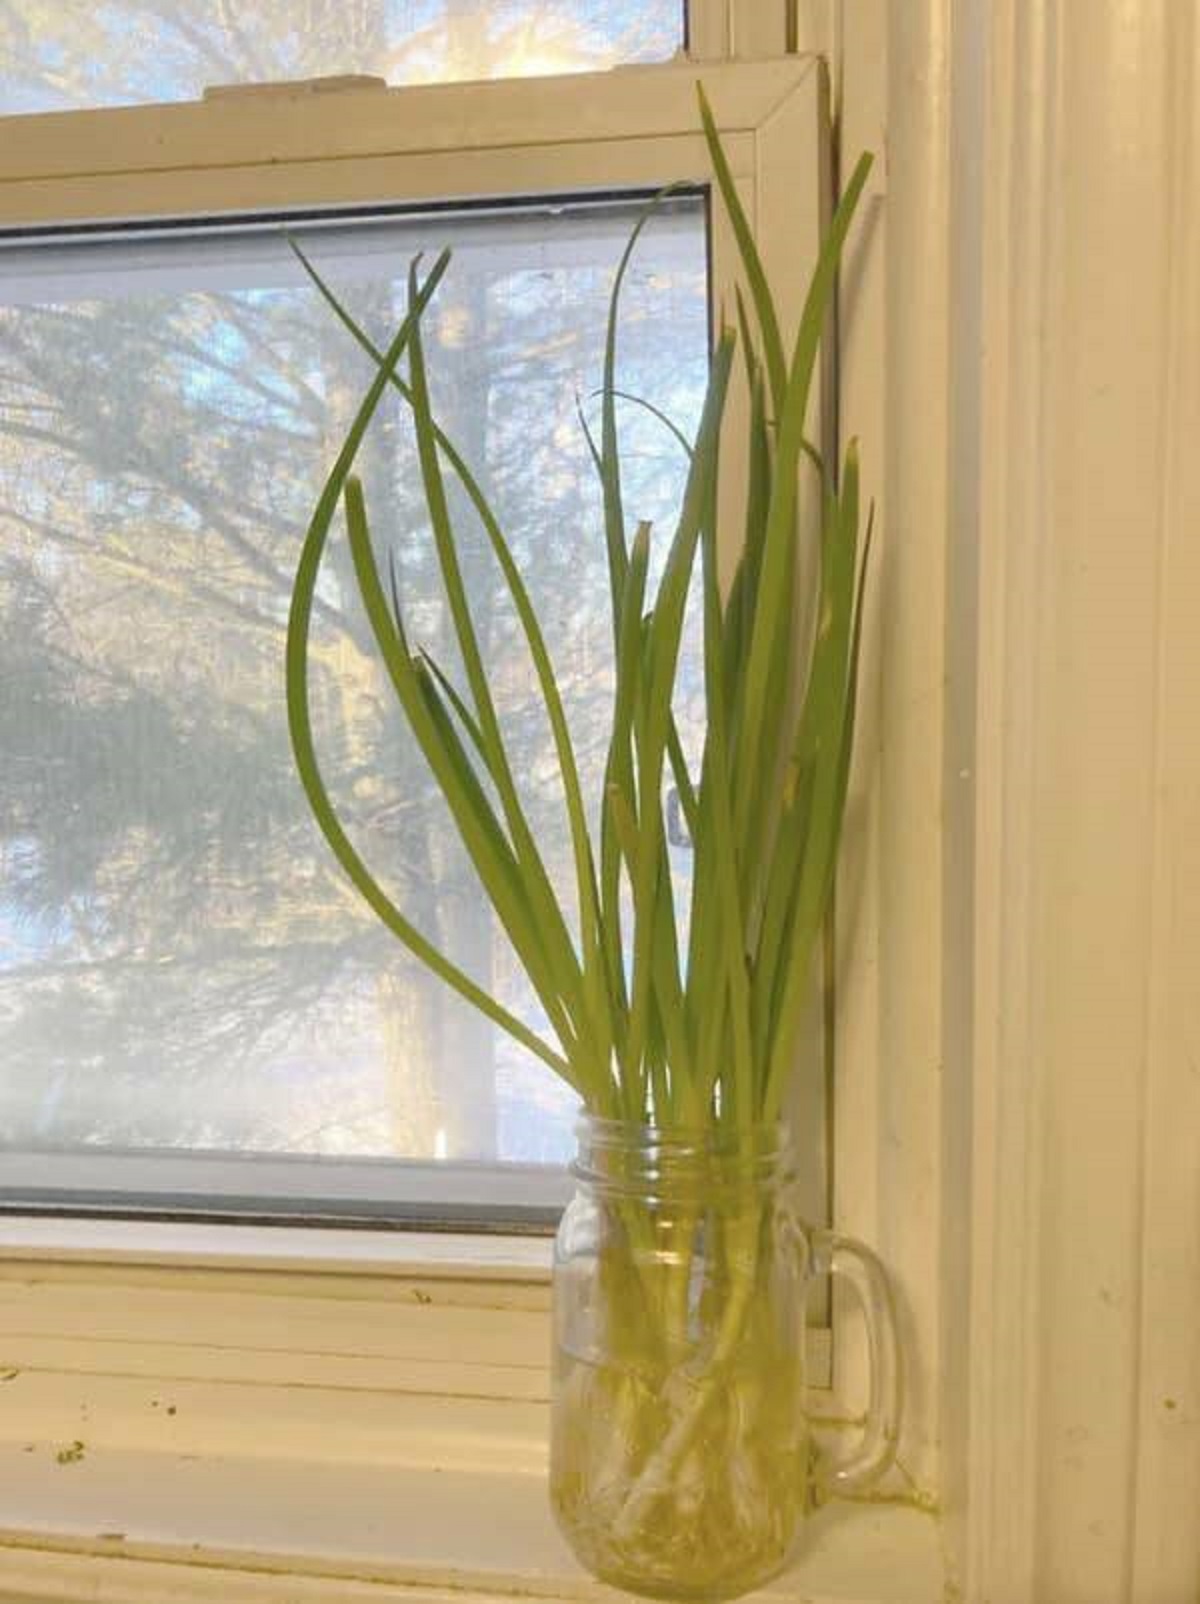 "For a nearly endless green onion hack, save the white ends (with the roots attached) of your green onions and place them in a jar of water somewhere that gets sunlight. "Spring onions in water work almost too well. Infinite greens!""